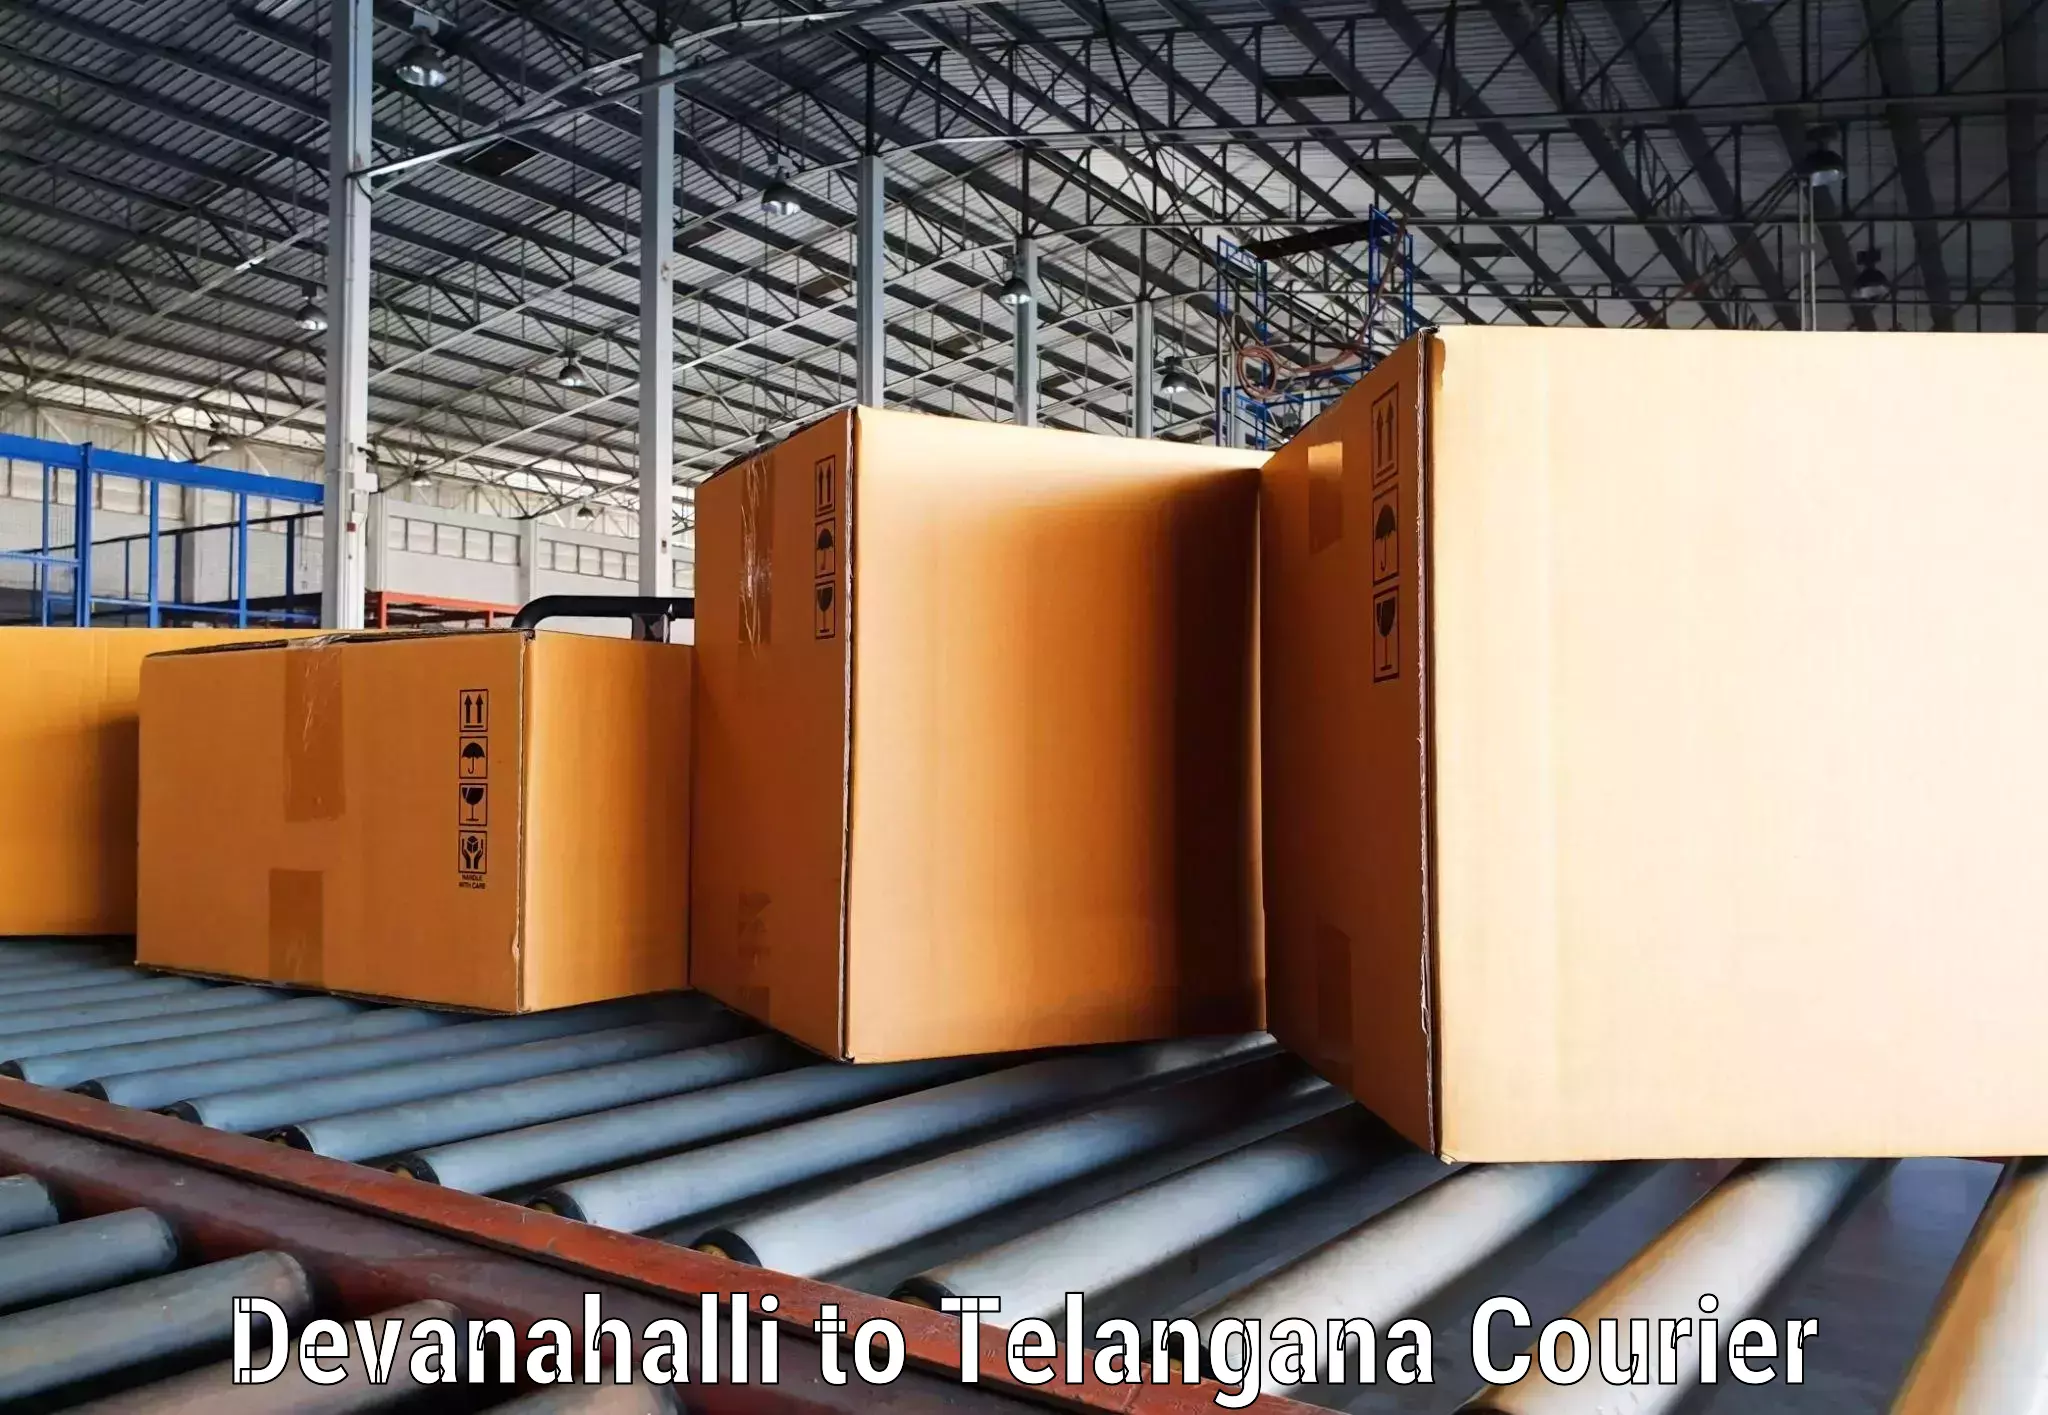 Streamlined delivery processes Devanahalli to Cheyyur